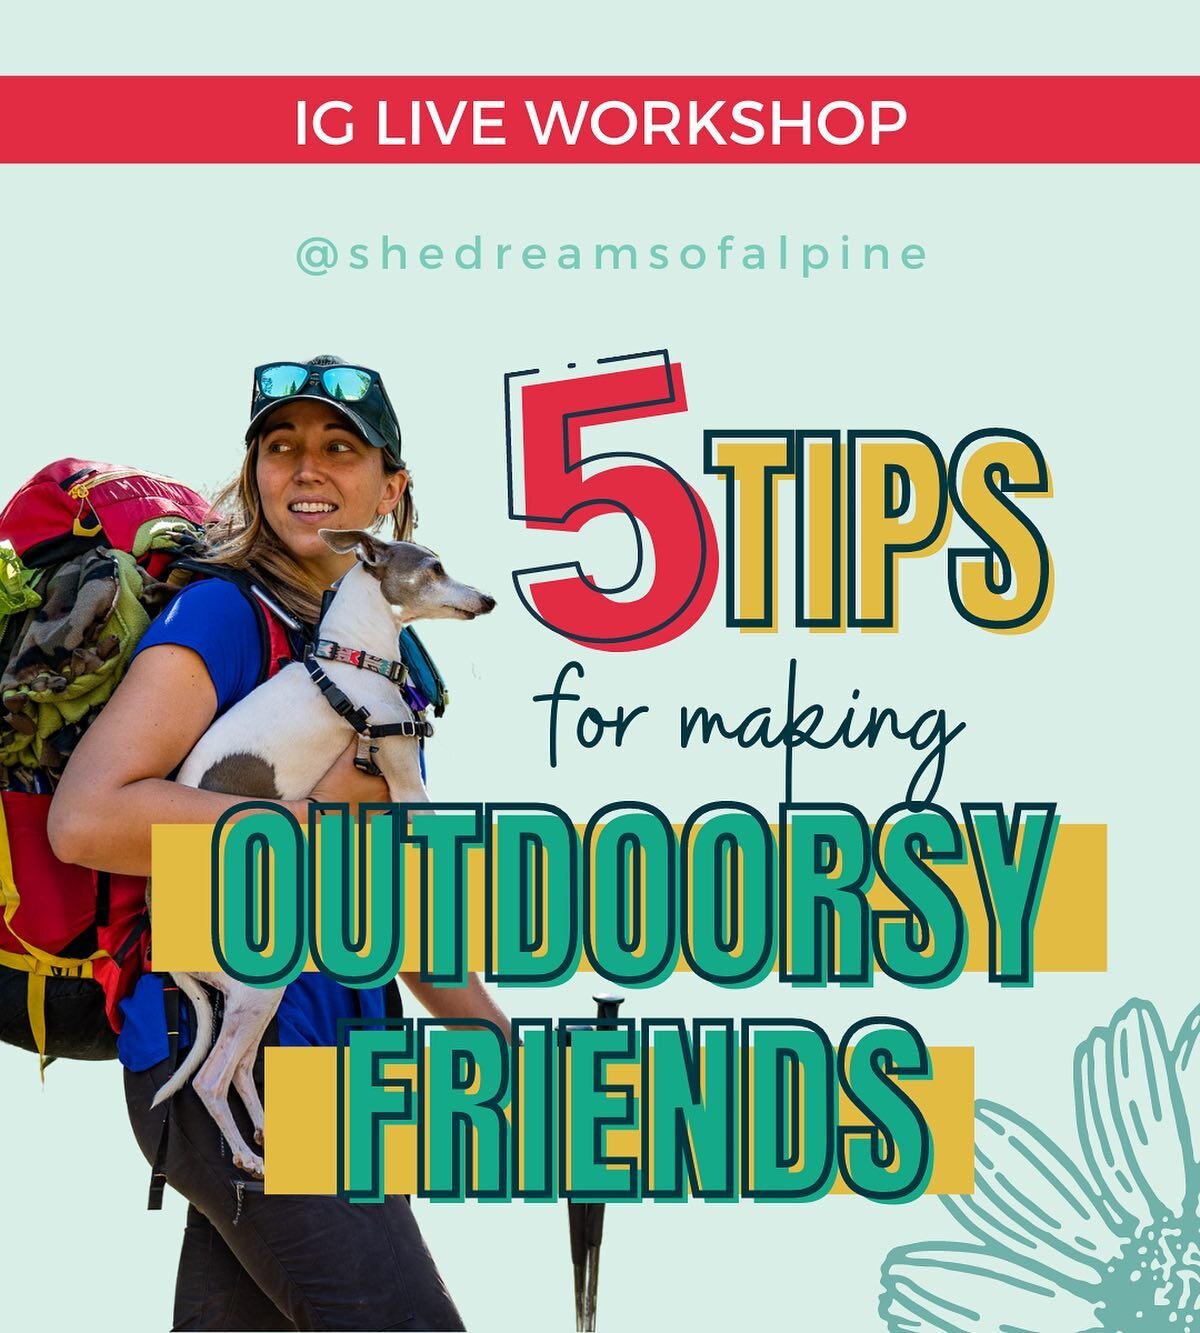 STOP WAITING and START ADVENTURING!

If you're lucky enough to be connected to an outdoorsy community and friends that are willing to show you the ropes and mentor you on your journey, then that is AMAZING. We don't all grow up with these kinds of co